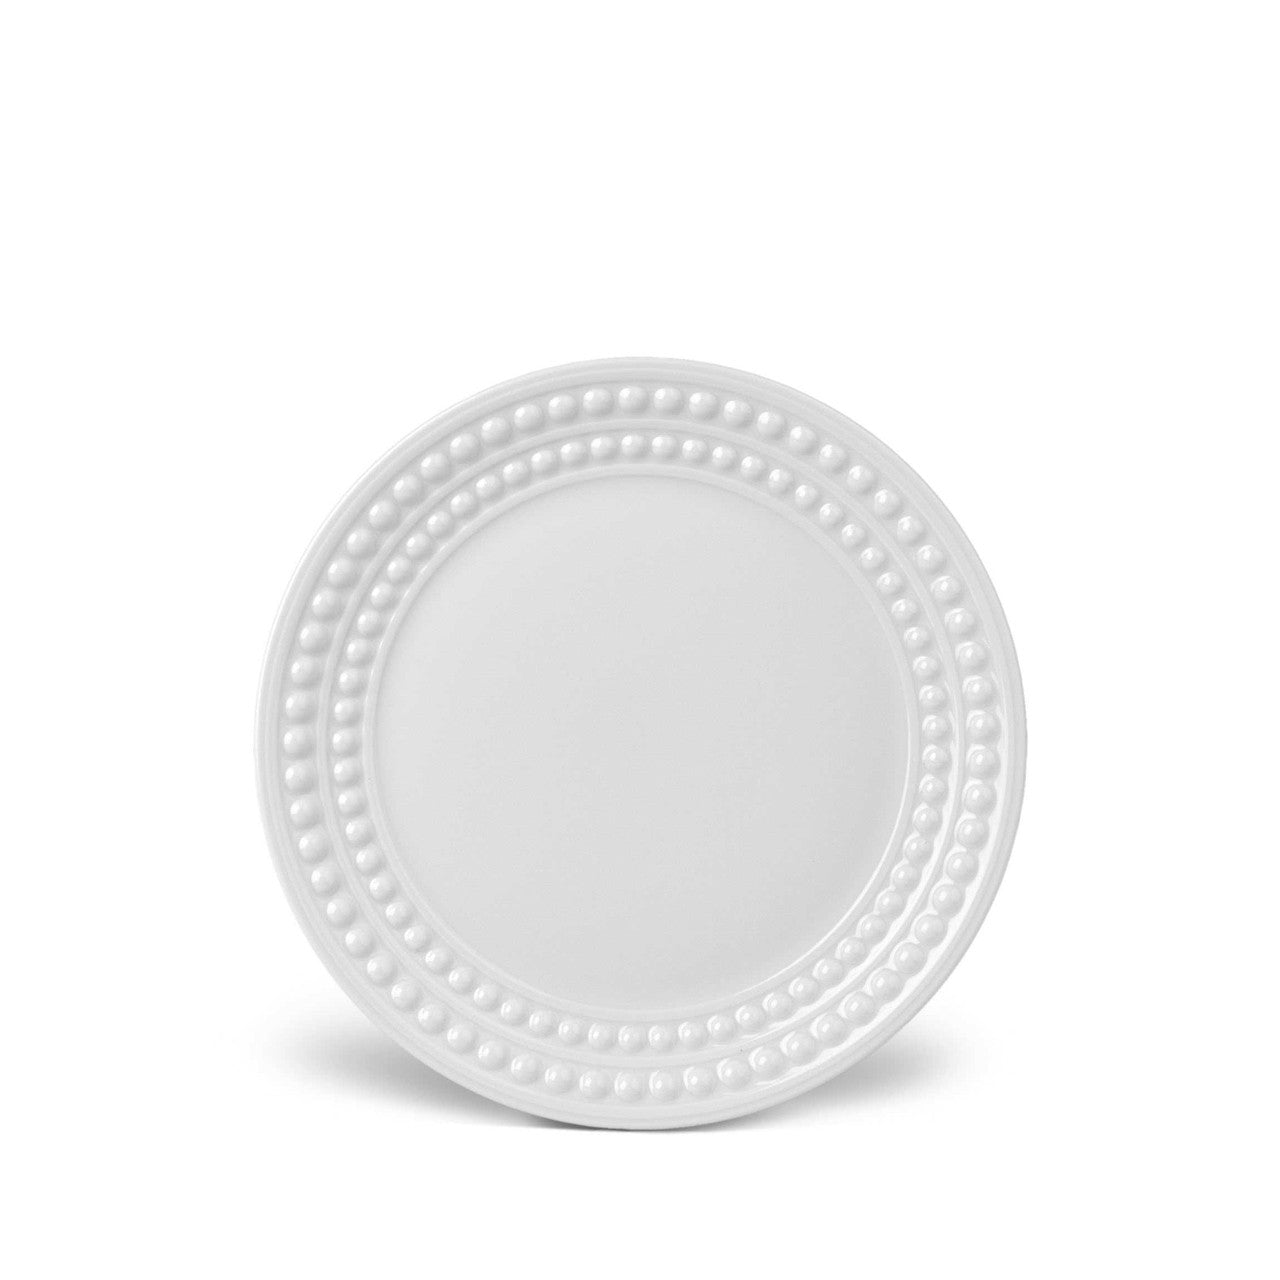 Perlee White Bread & Butter Plate - RSVP Style